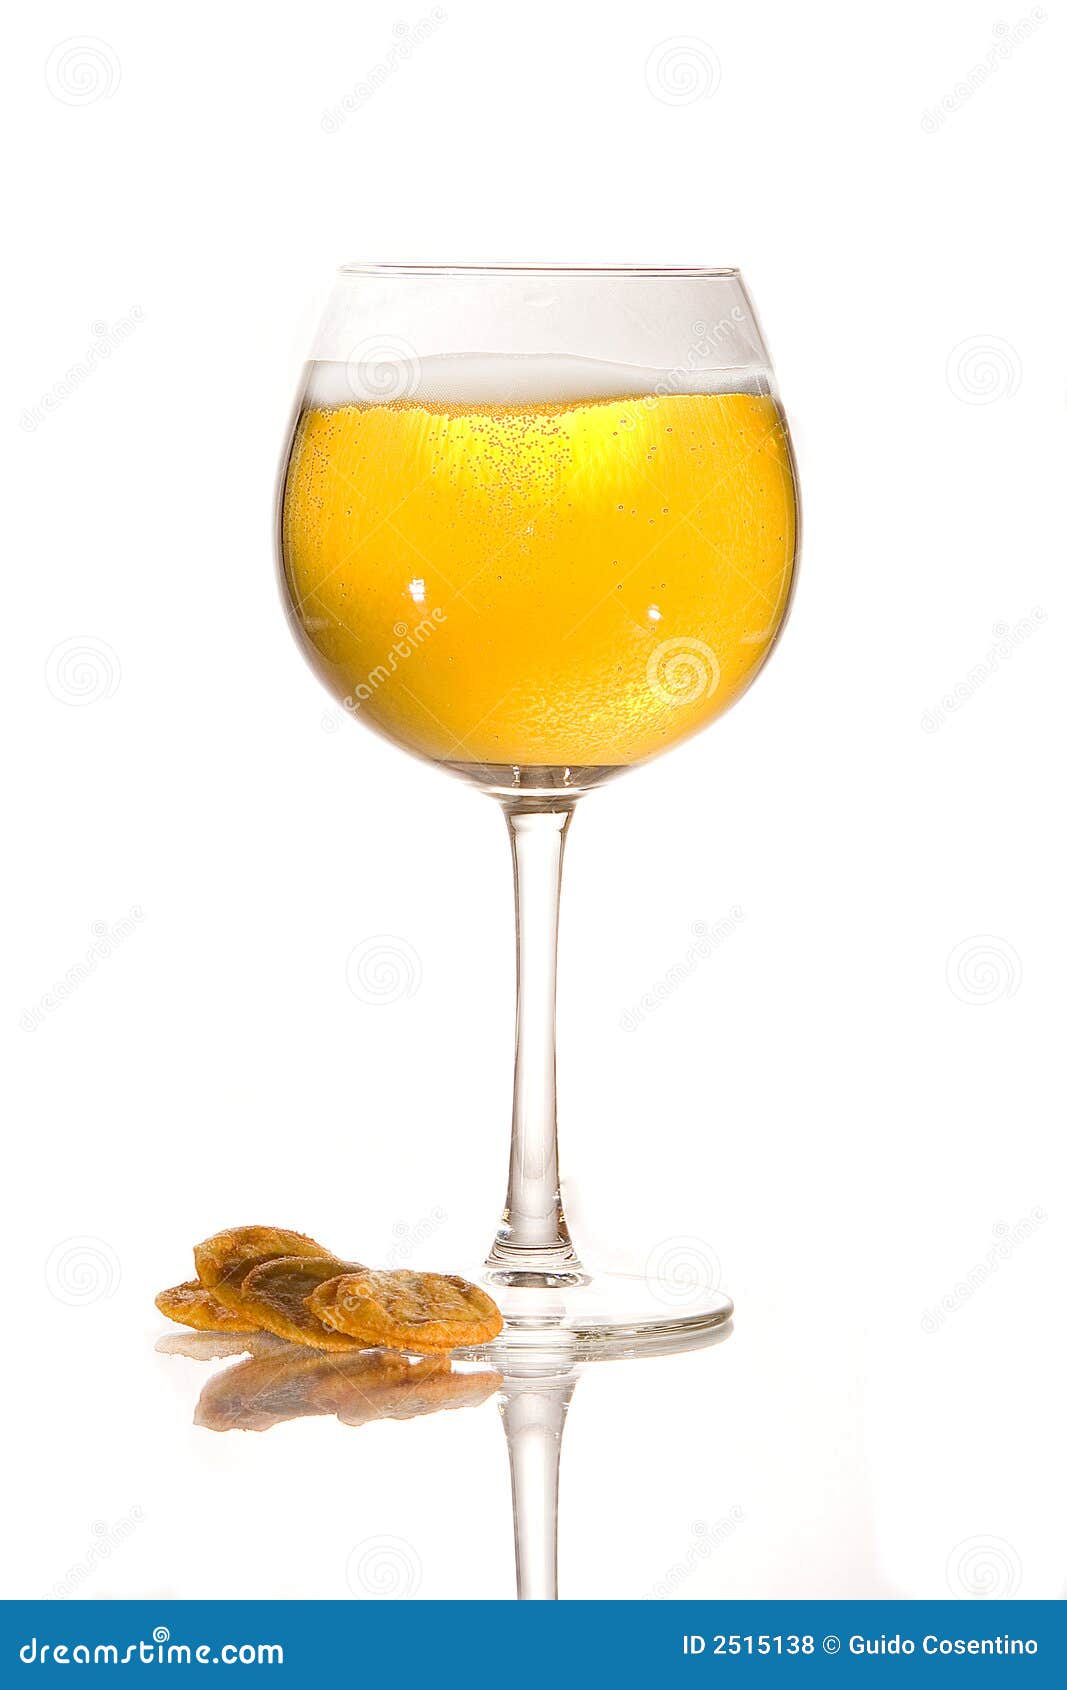 a refershing glass of beer